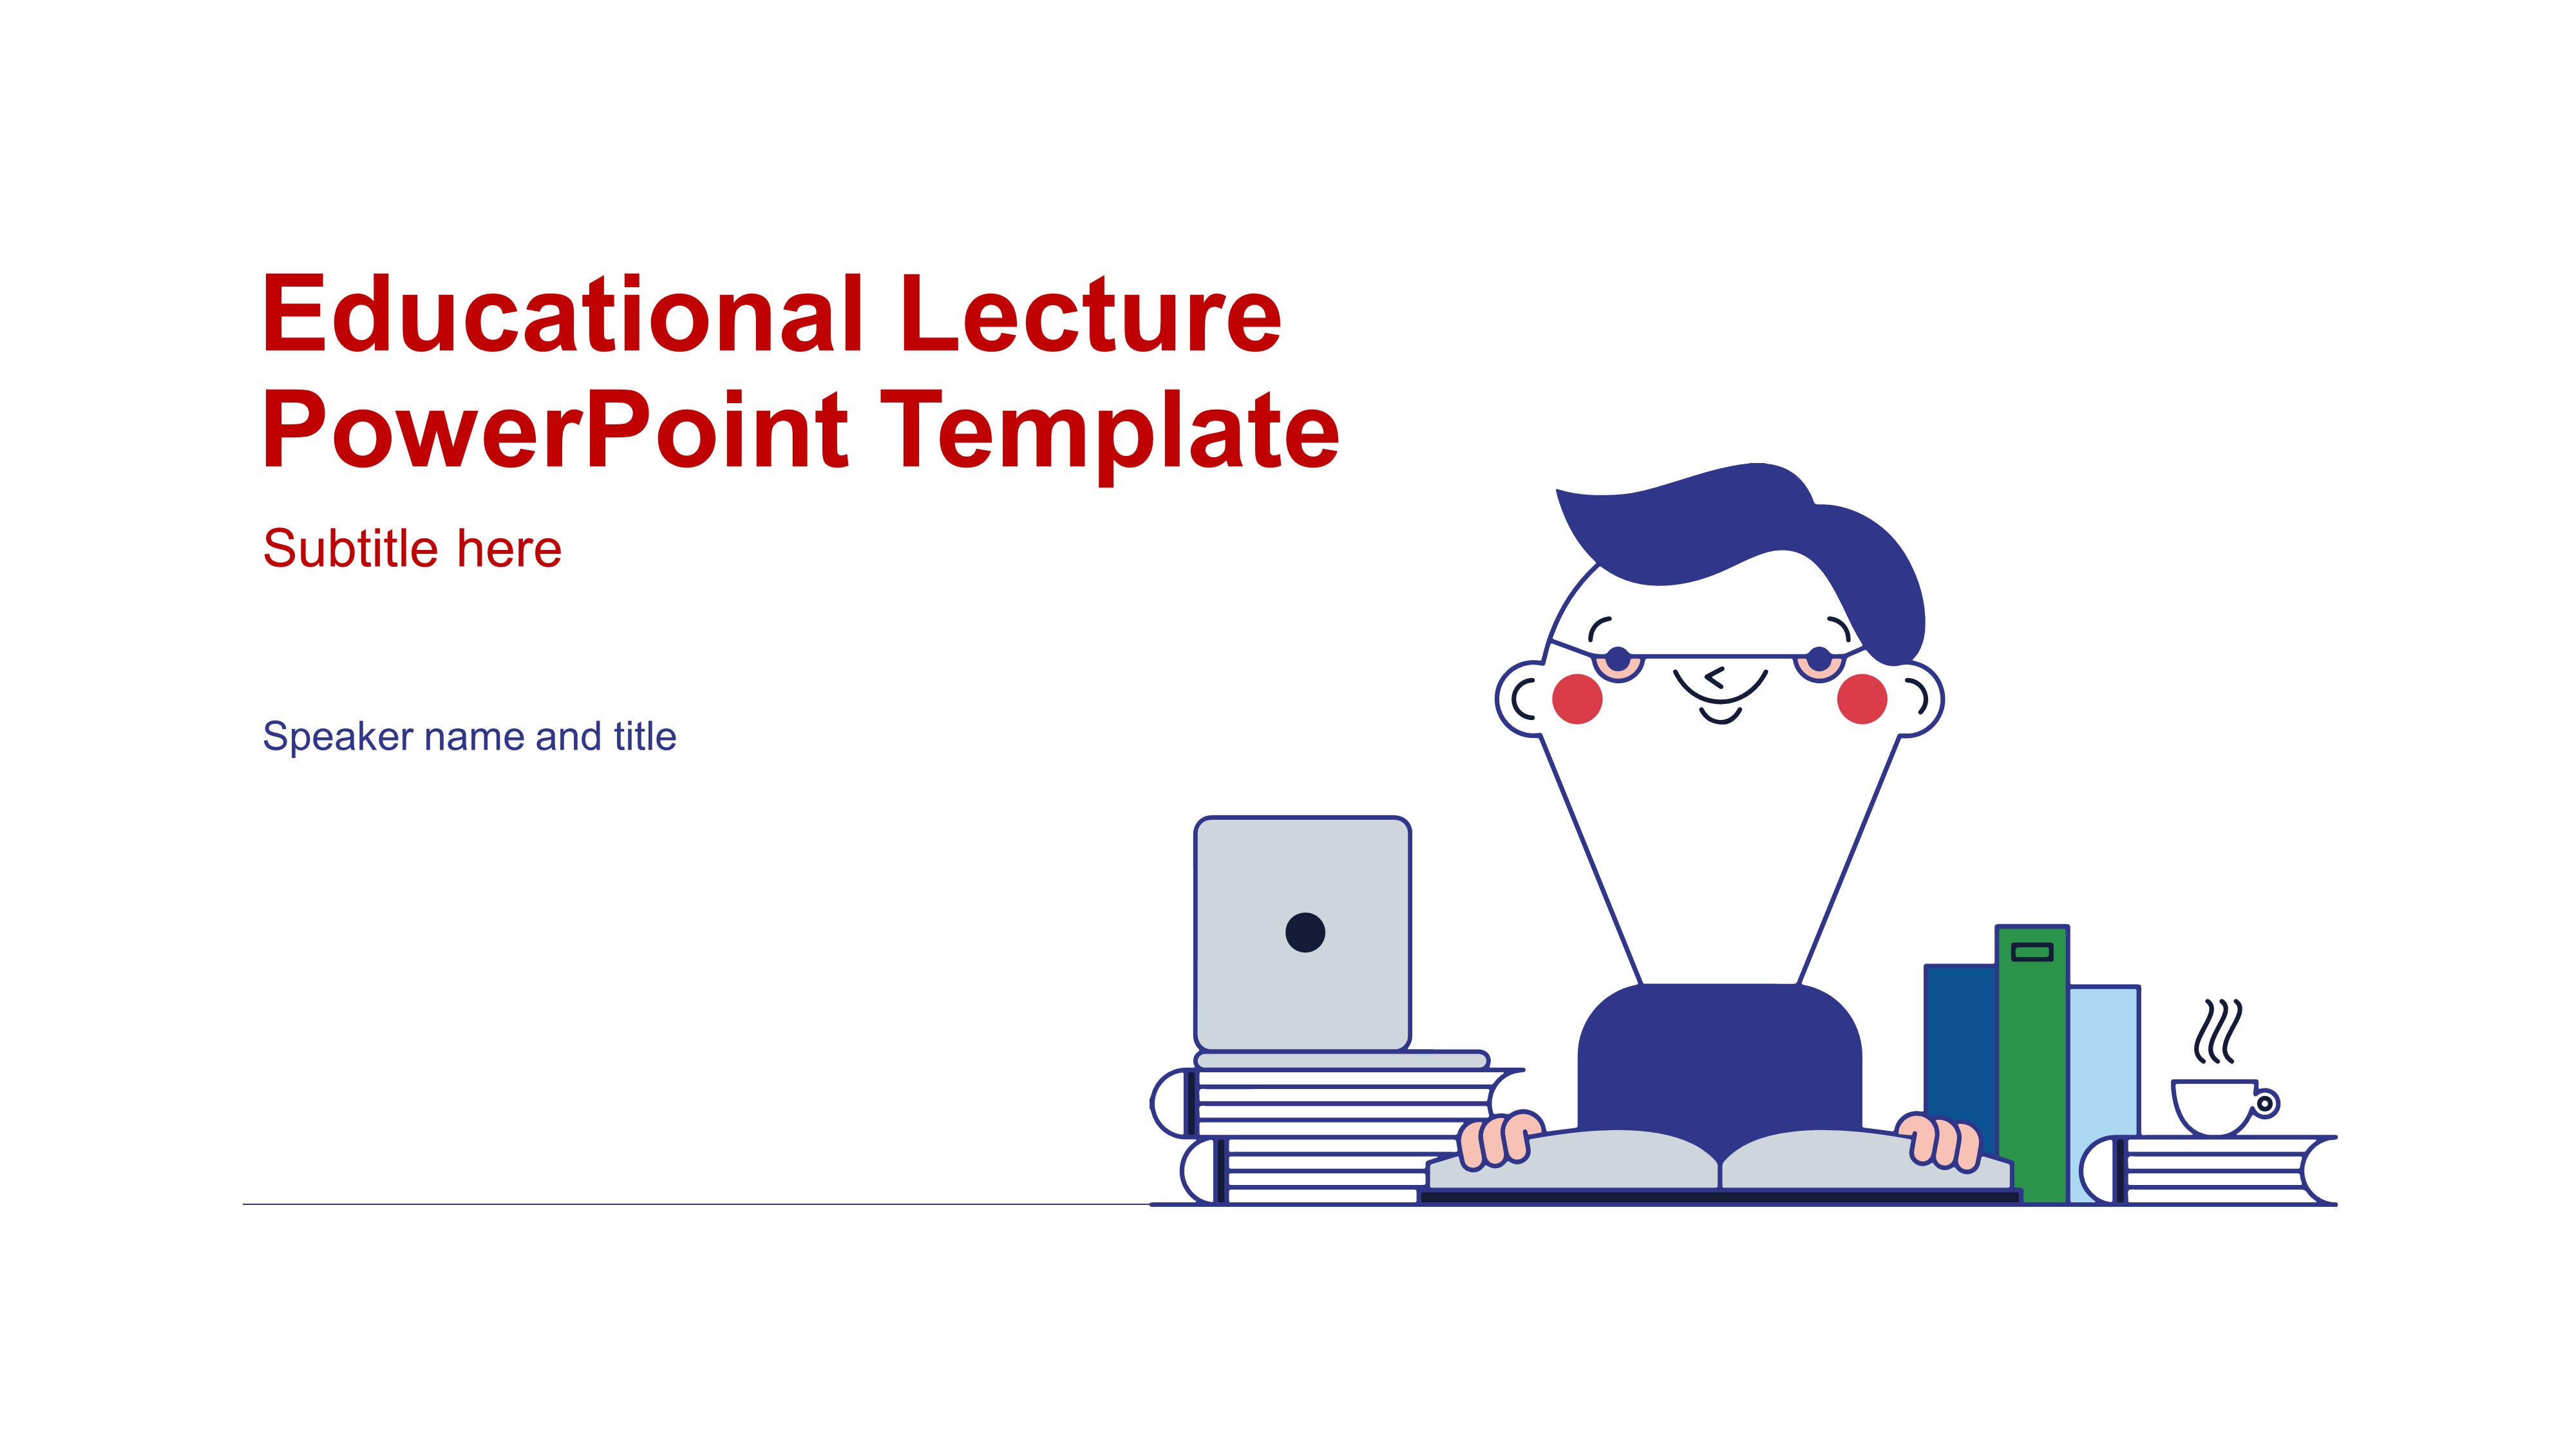 design and creation of the presentations of lecture material